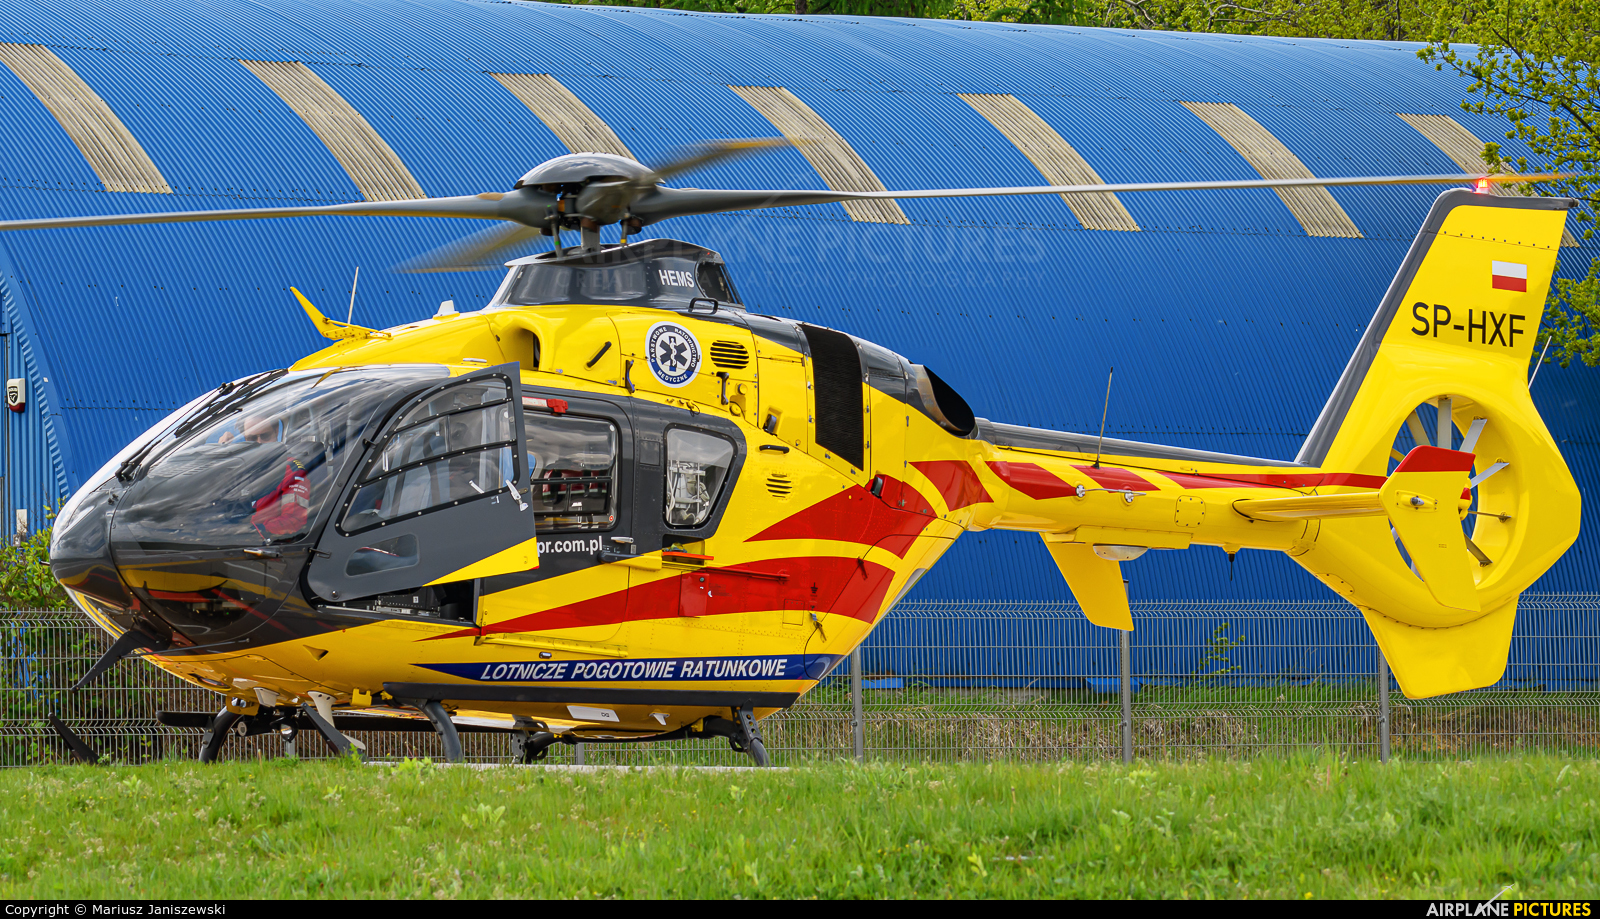 Polish Medical Air Rescue - Lotnicze Pogotowie Ratunkowe SP-HXF aircraft at Katowice Muchowiec